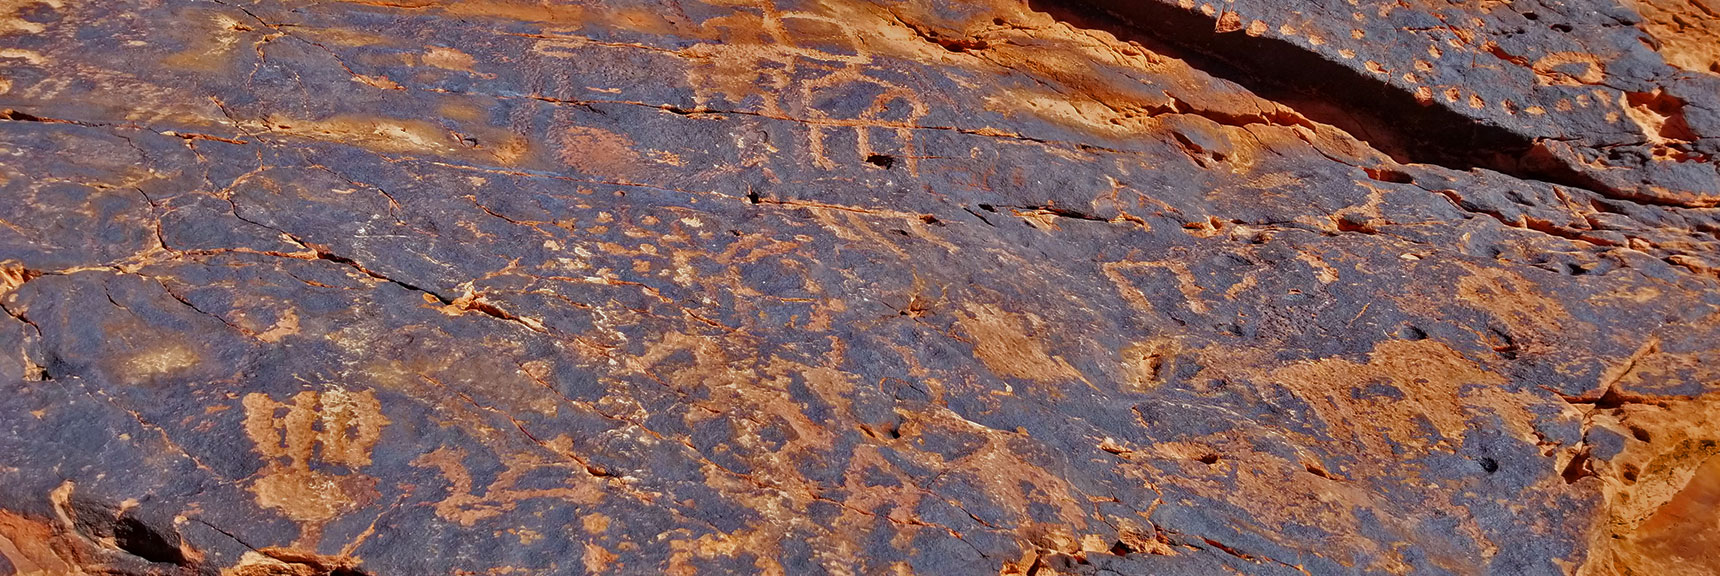 Petroglyphs on Mouse's Tank Trail in Valley of Fire State Park, Nevada, Slide 9